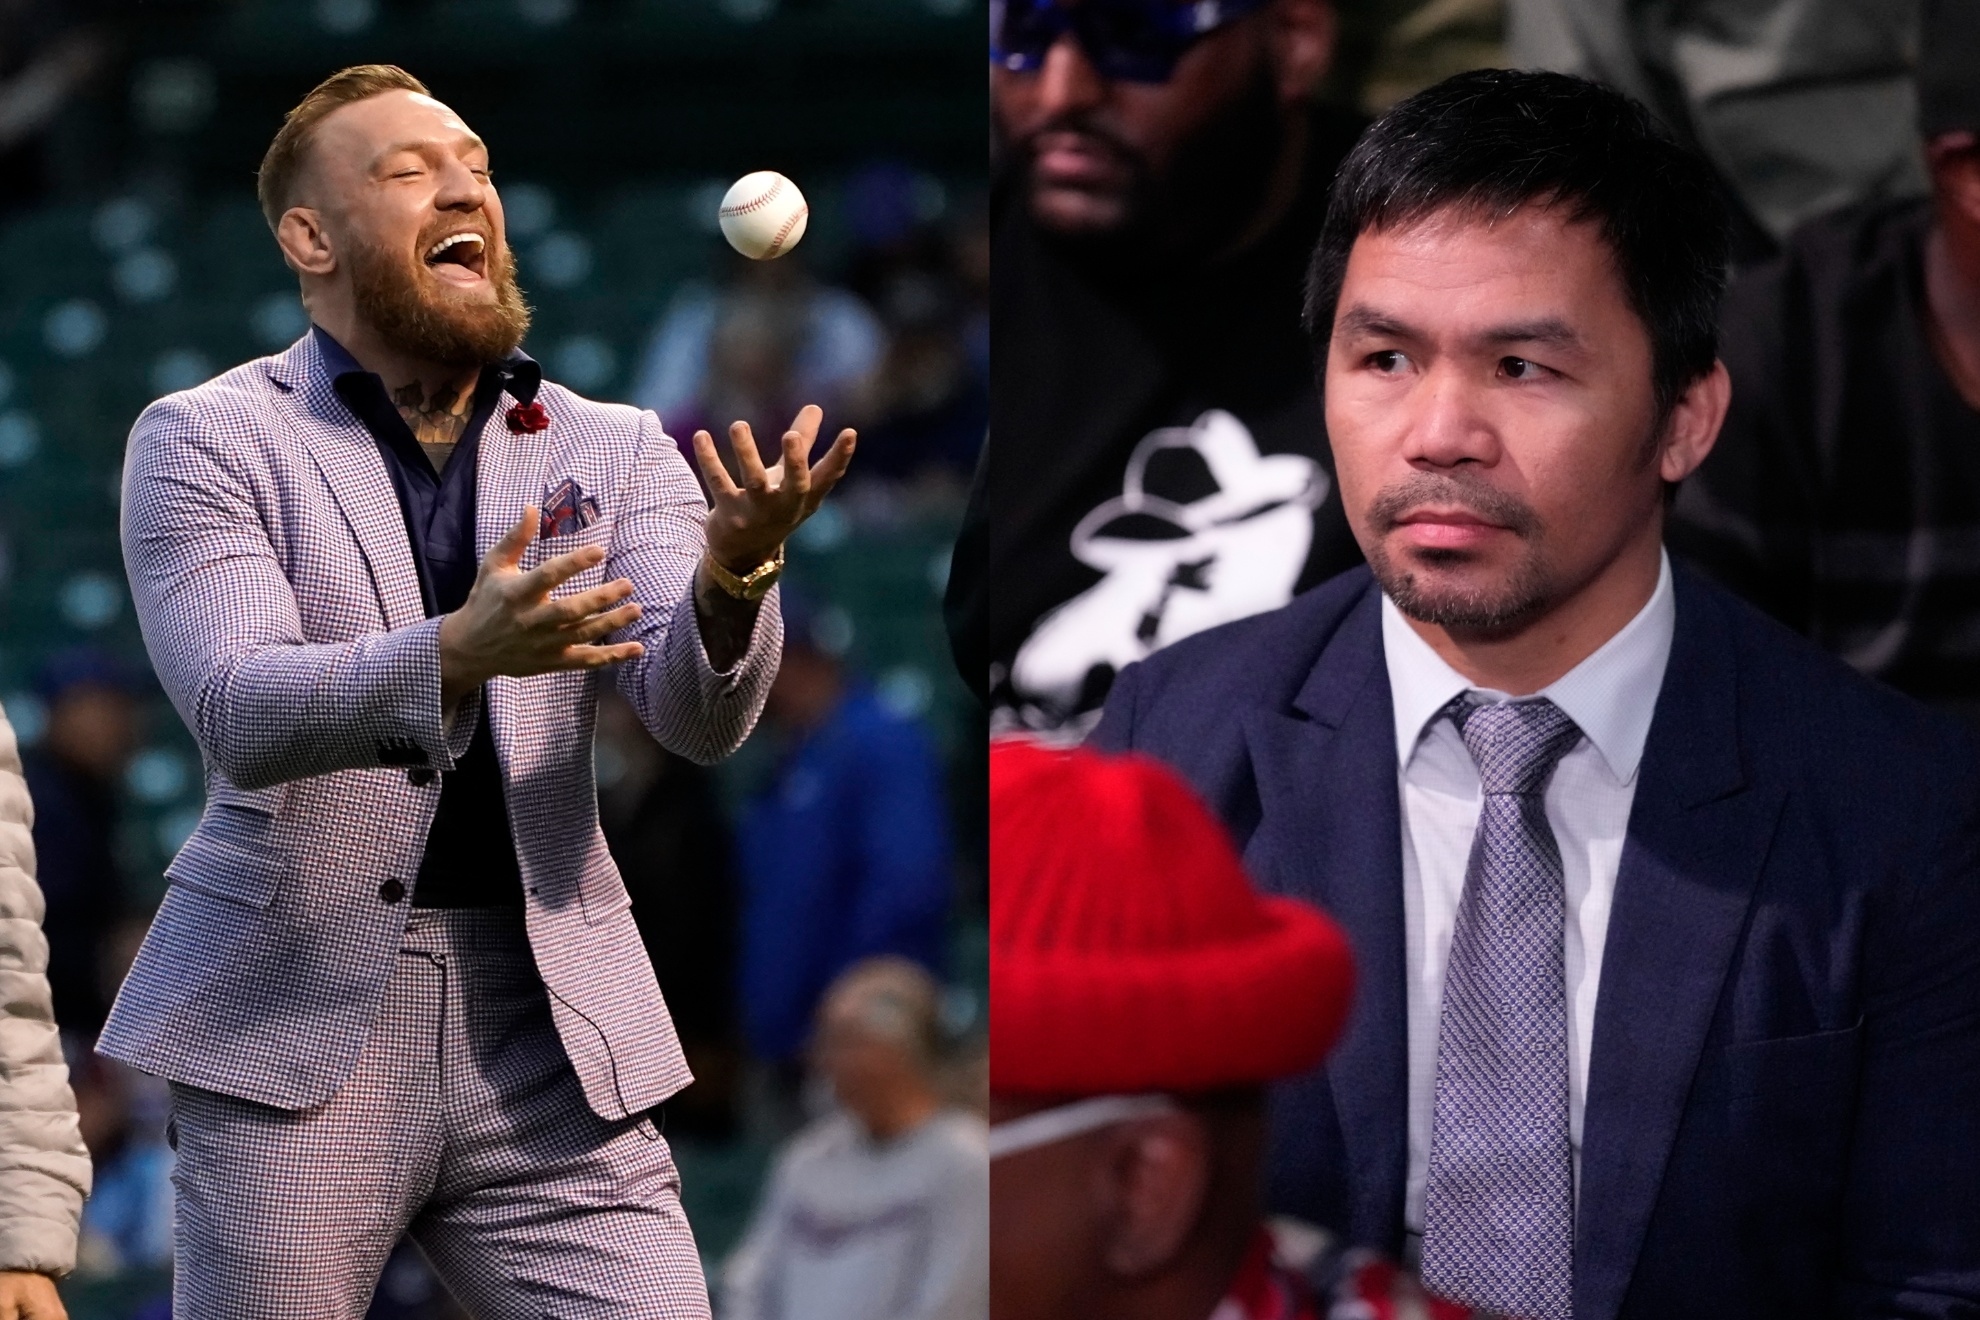 Mashup image of Conor McGregor and Manny Macquiao